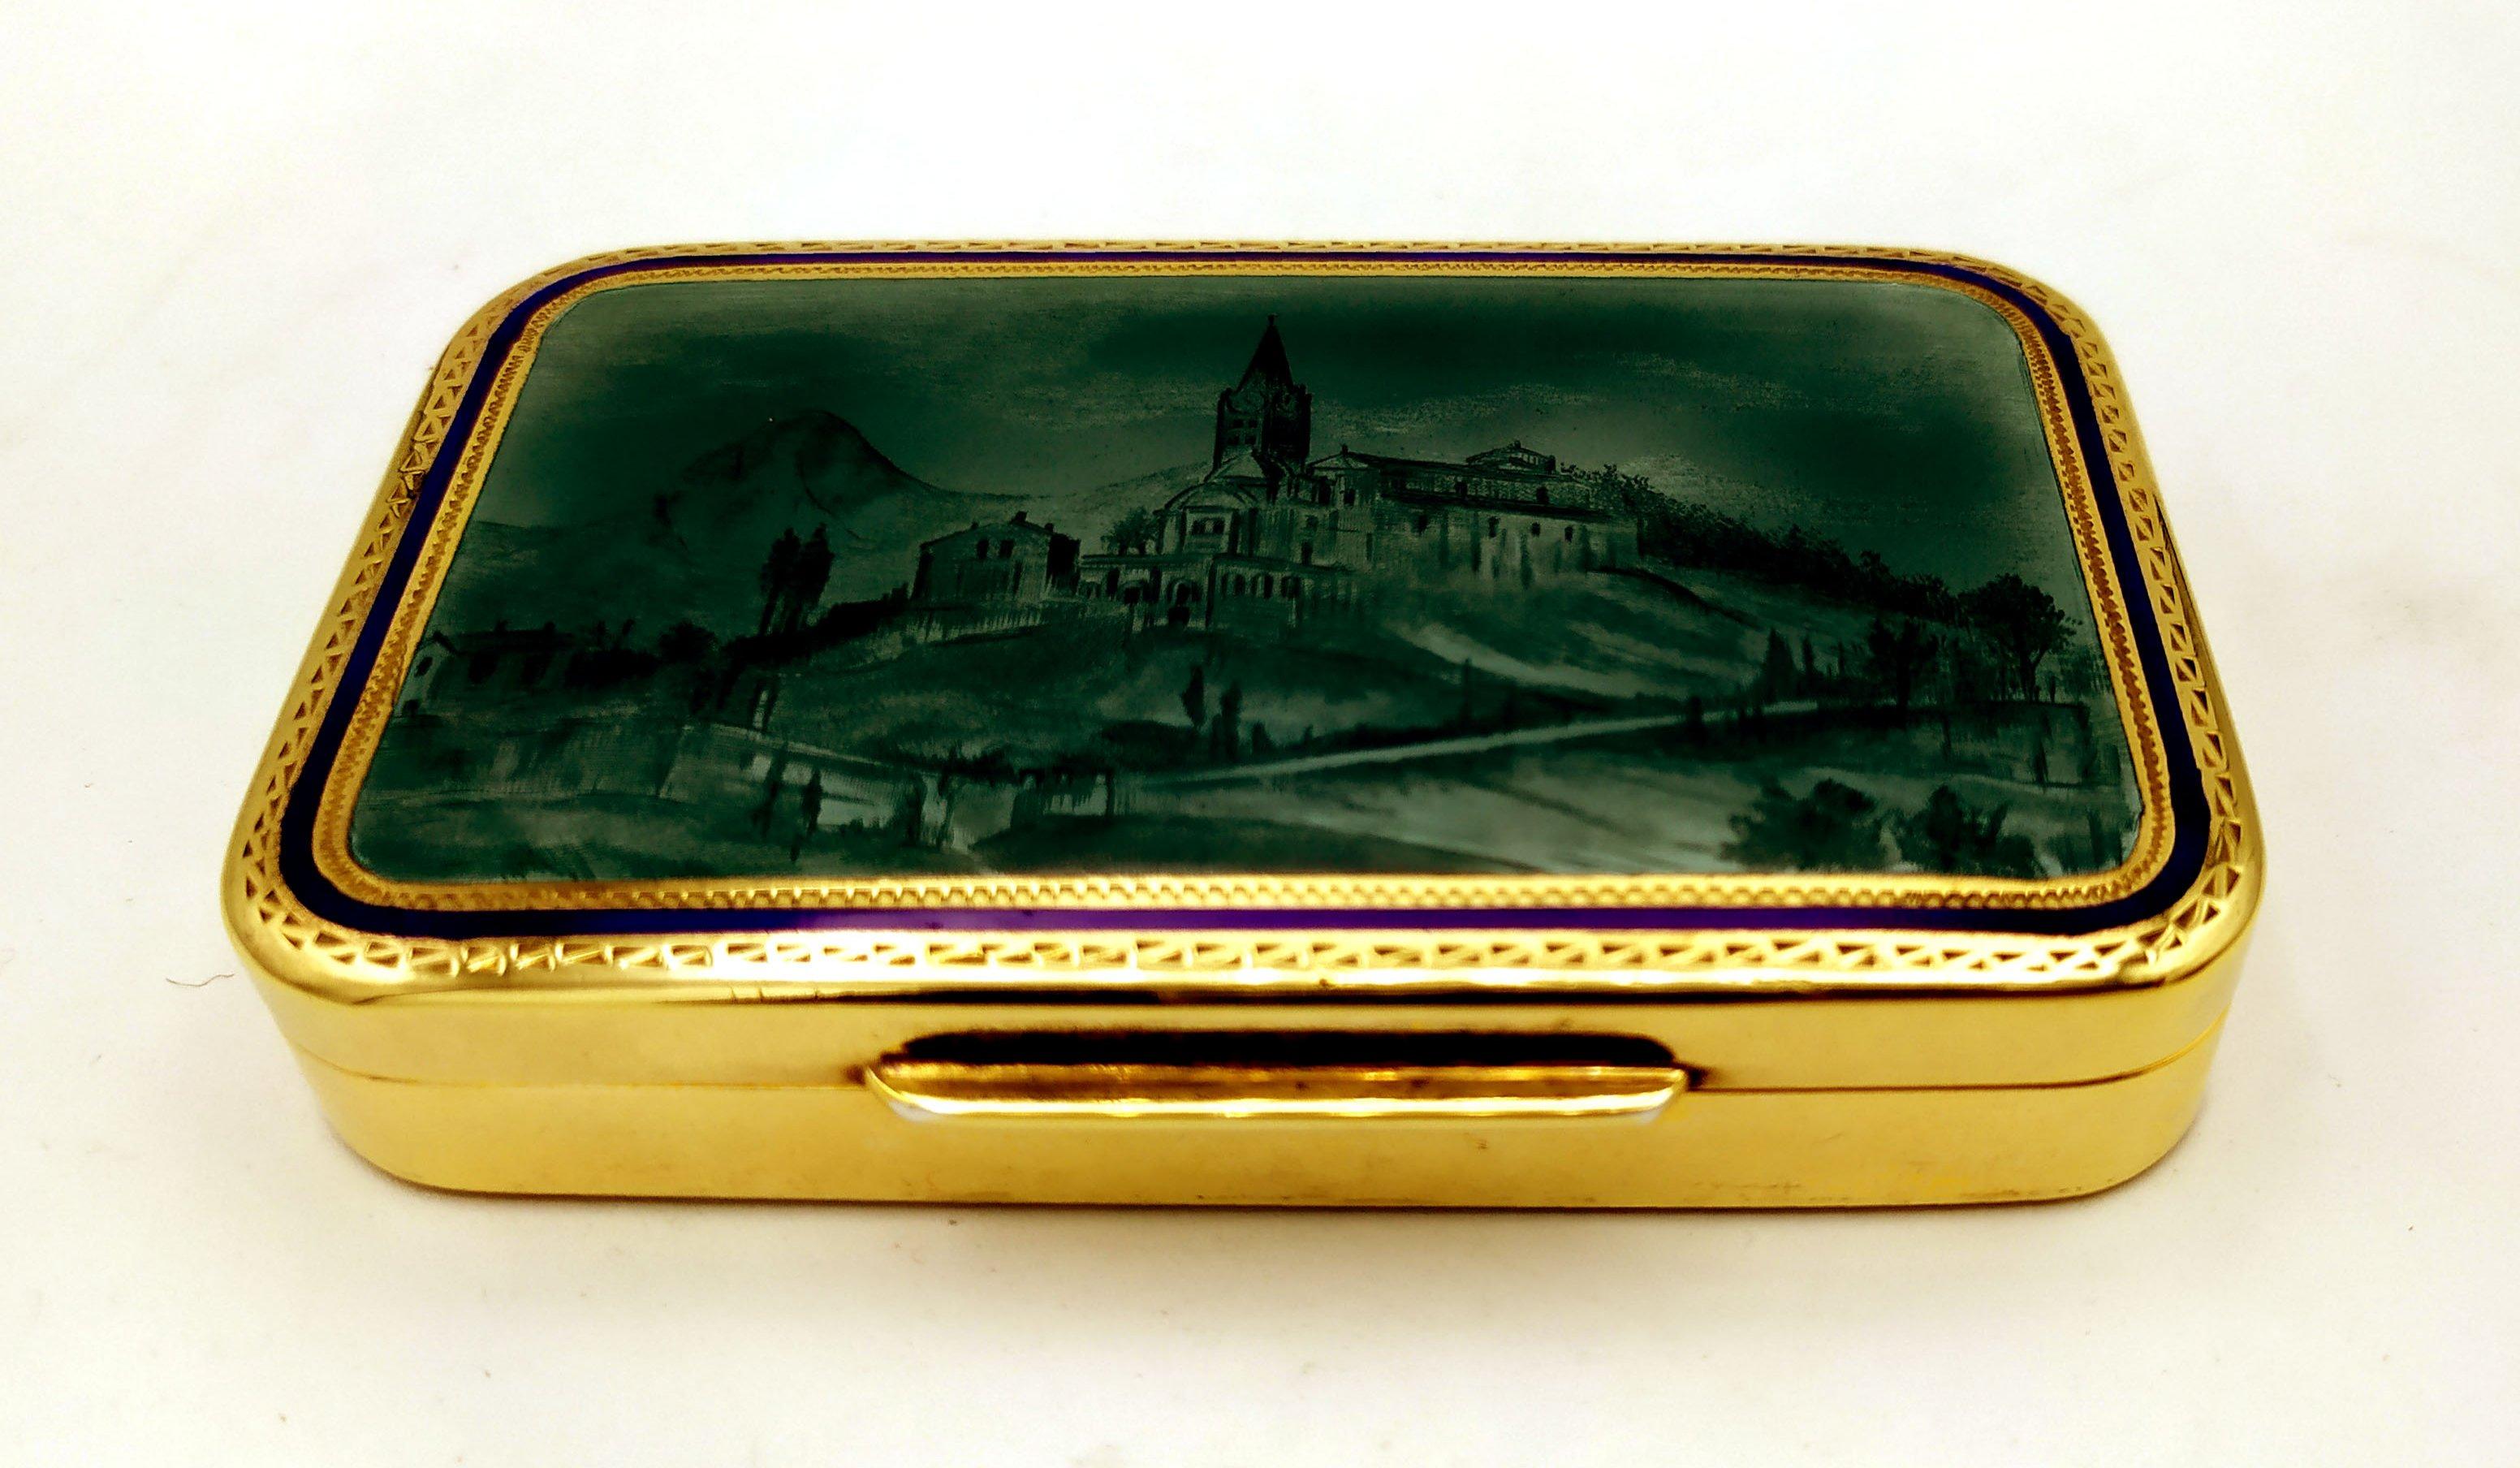 Rectangular table cigarette case with rounded corners in 925/1000 sterling silver gold plated with translucent fired enamel on a fine hand-engraved mountain landscape. Contemporary modern style. Dimensions cm. 5.7 x 9 x 1.5. Weight gr. 163. Designed